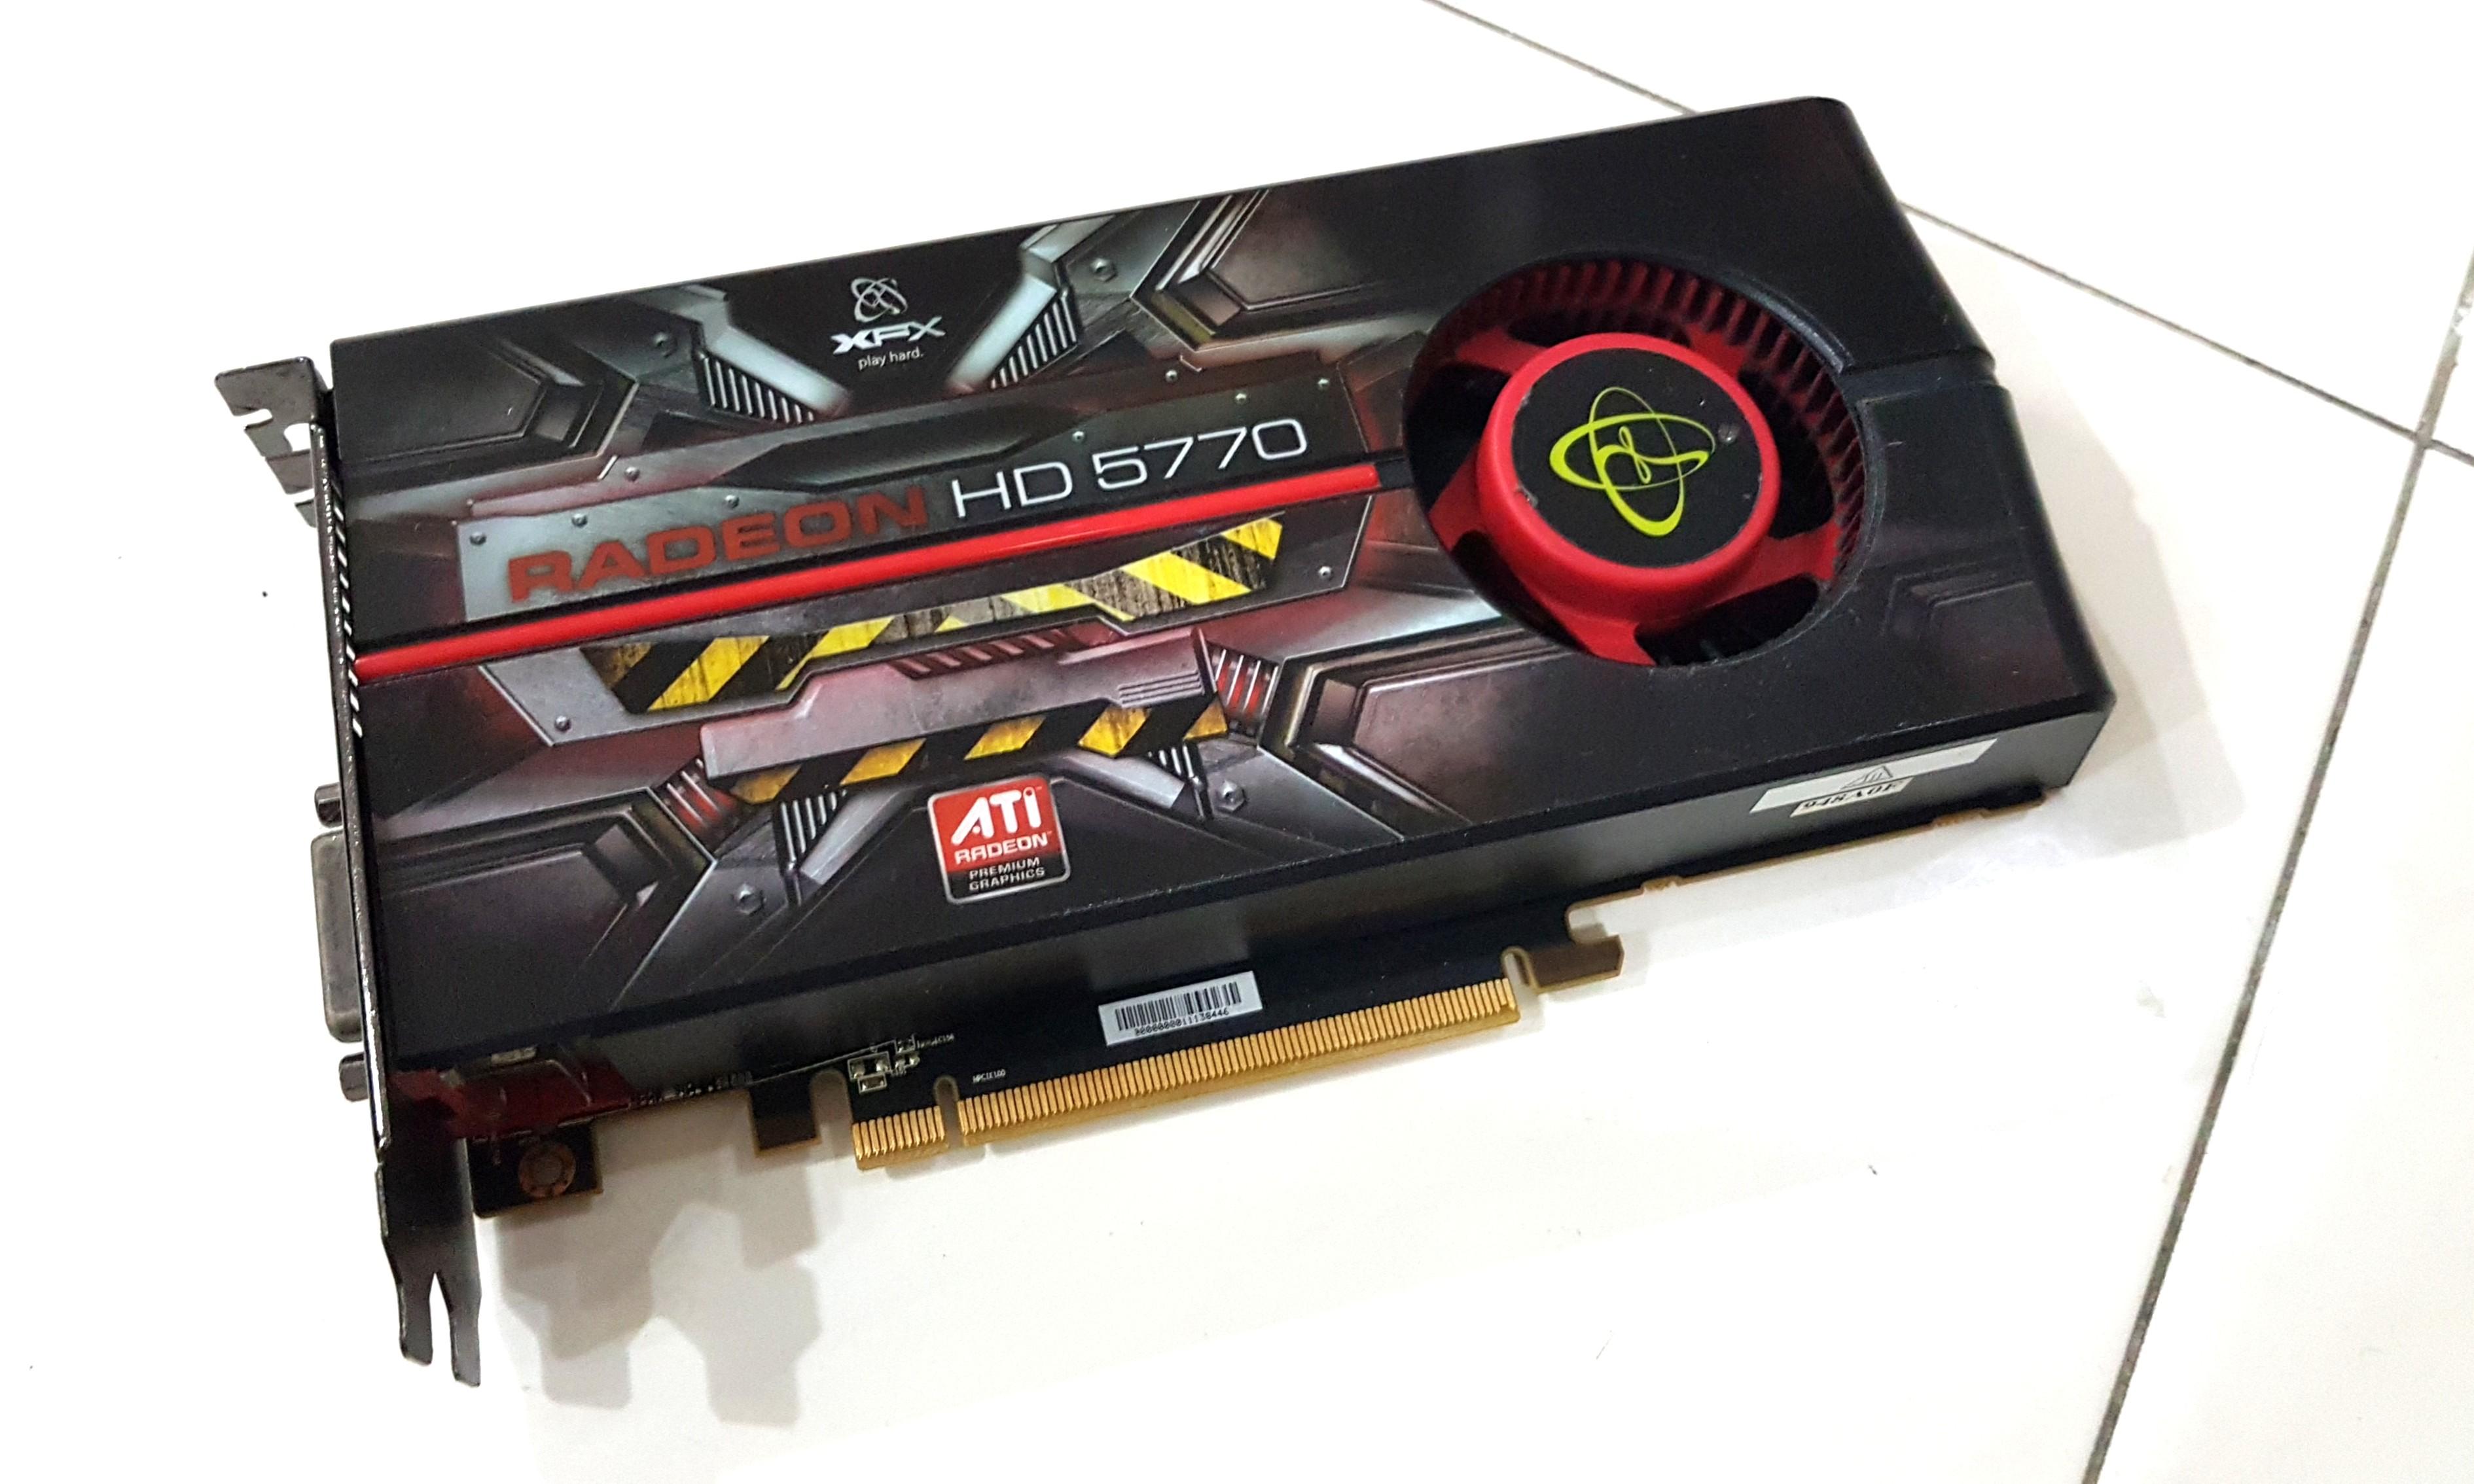 Xfx Ati Radeon Hd 5770 1gb Graphic Card Computers Tech Parts Accessories Networking On Carousell